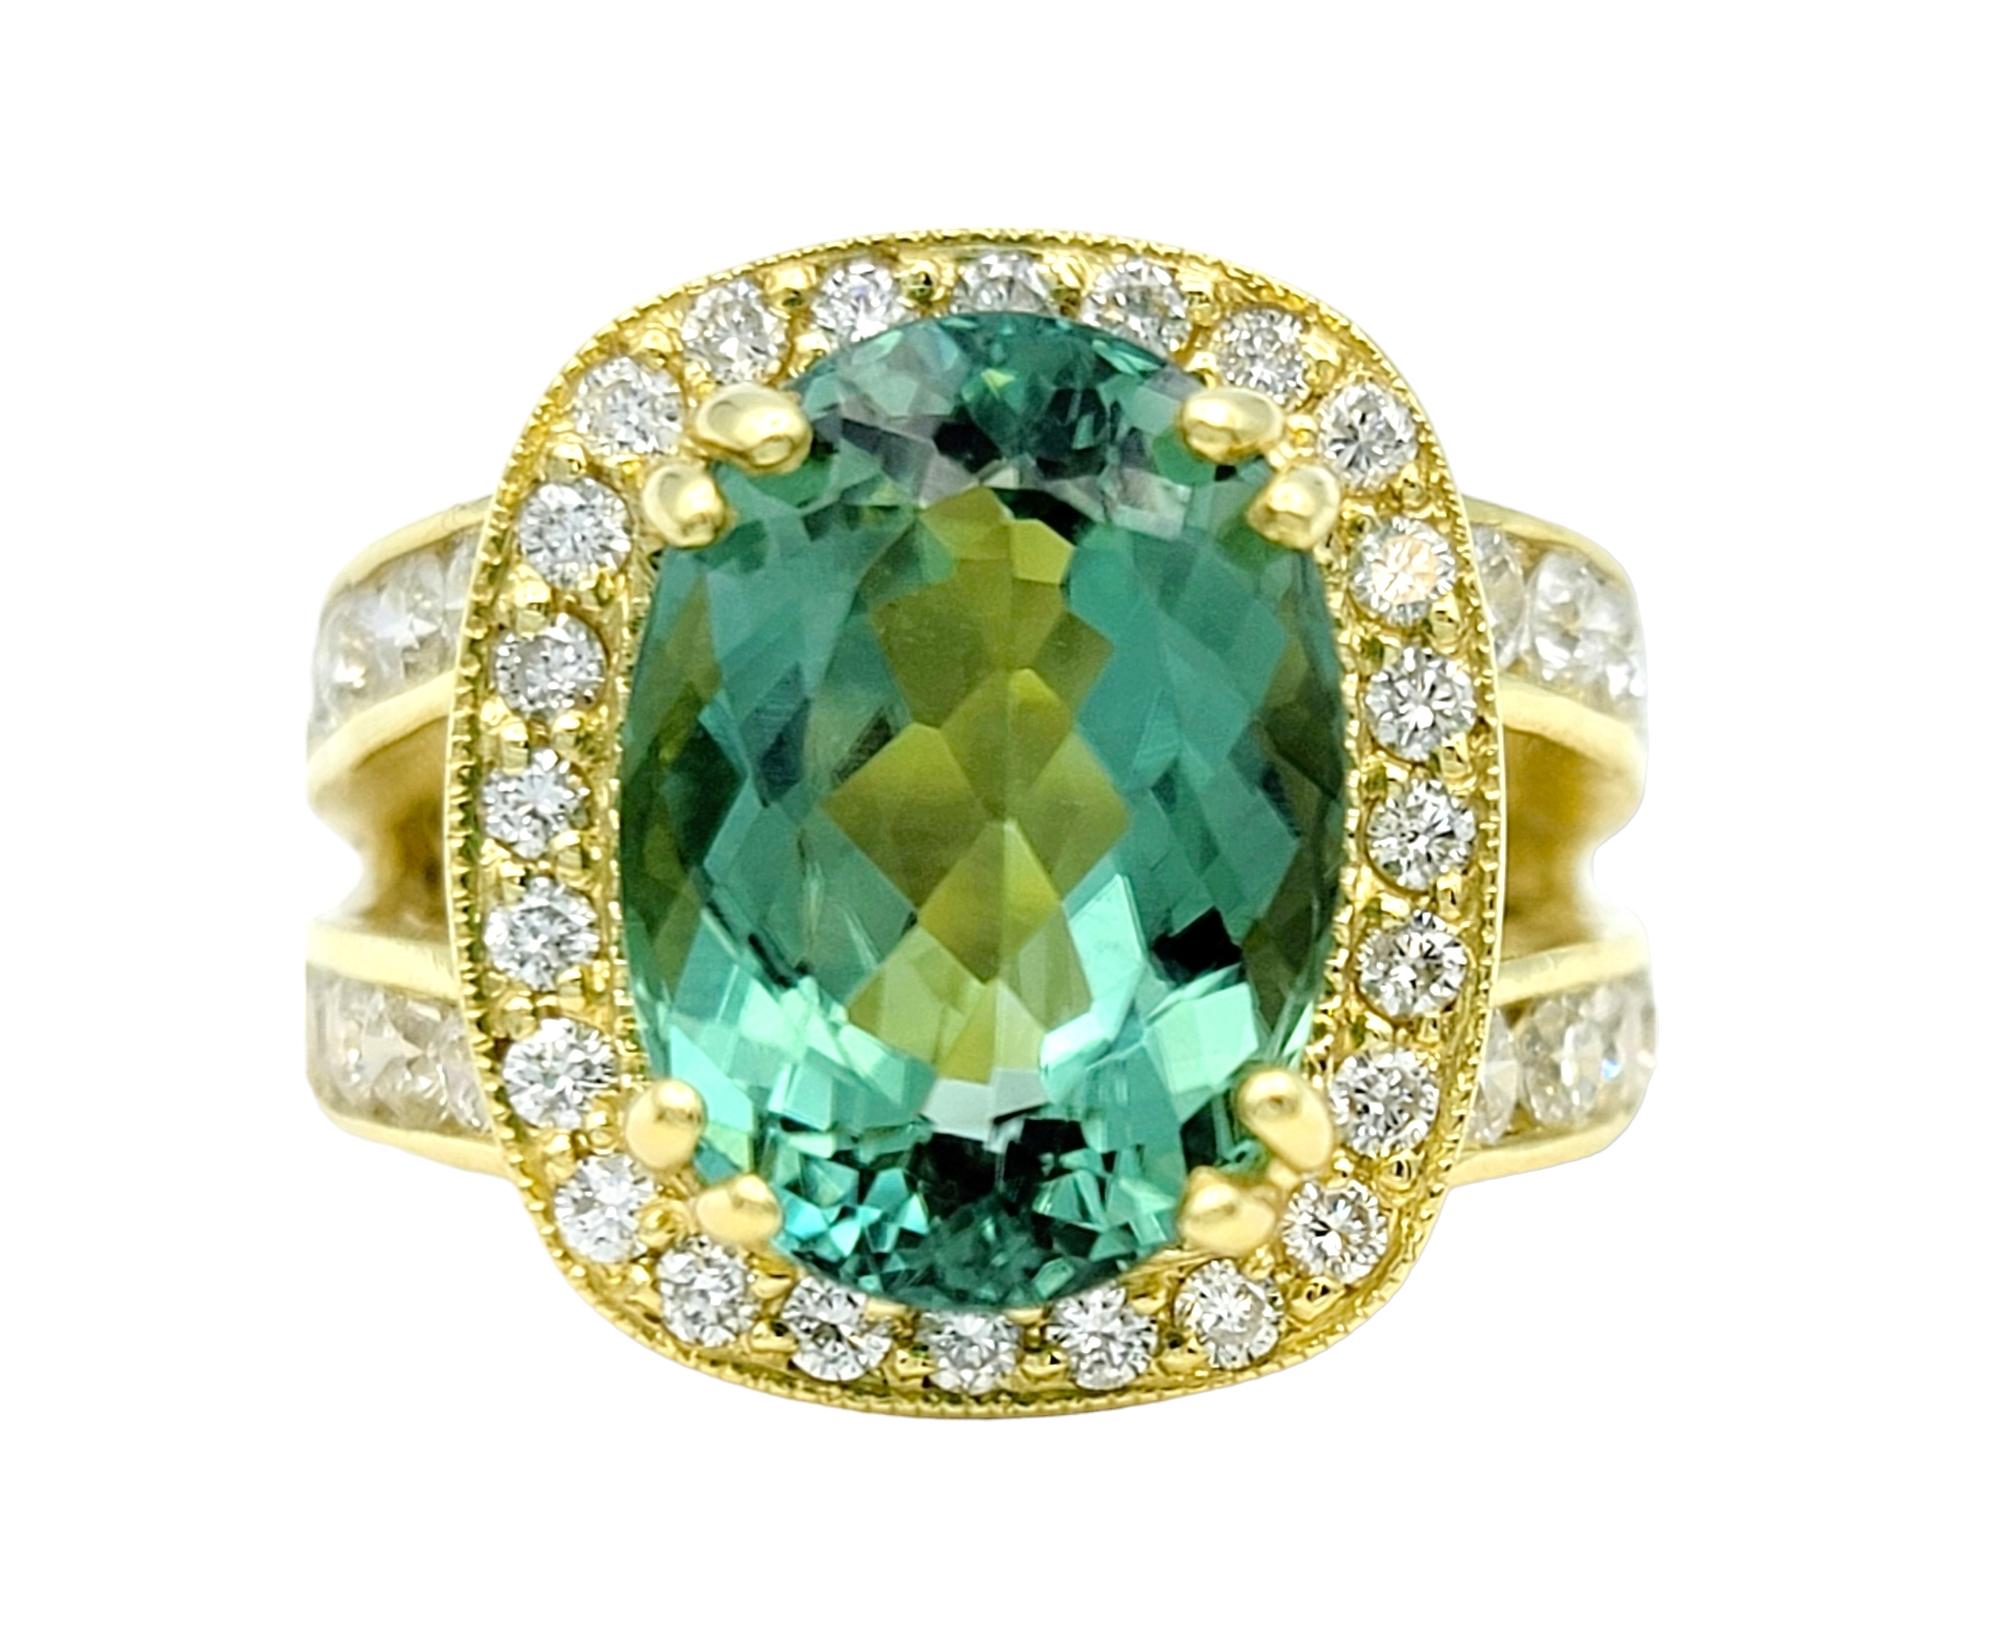 Ring Size: 5.5

This exquisite cocktail ring showcases an elegant blend of timeless sophistication and modern allure. Crafted in lustrous 18-karat yellow gold, the ring features a captivating oval-cut green tourmaline at its heart, radiating a rich